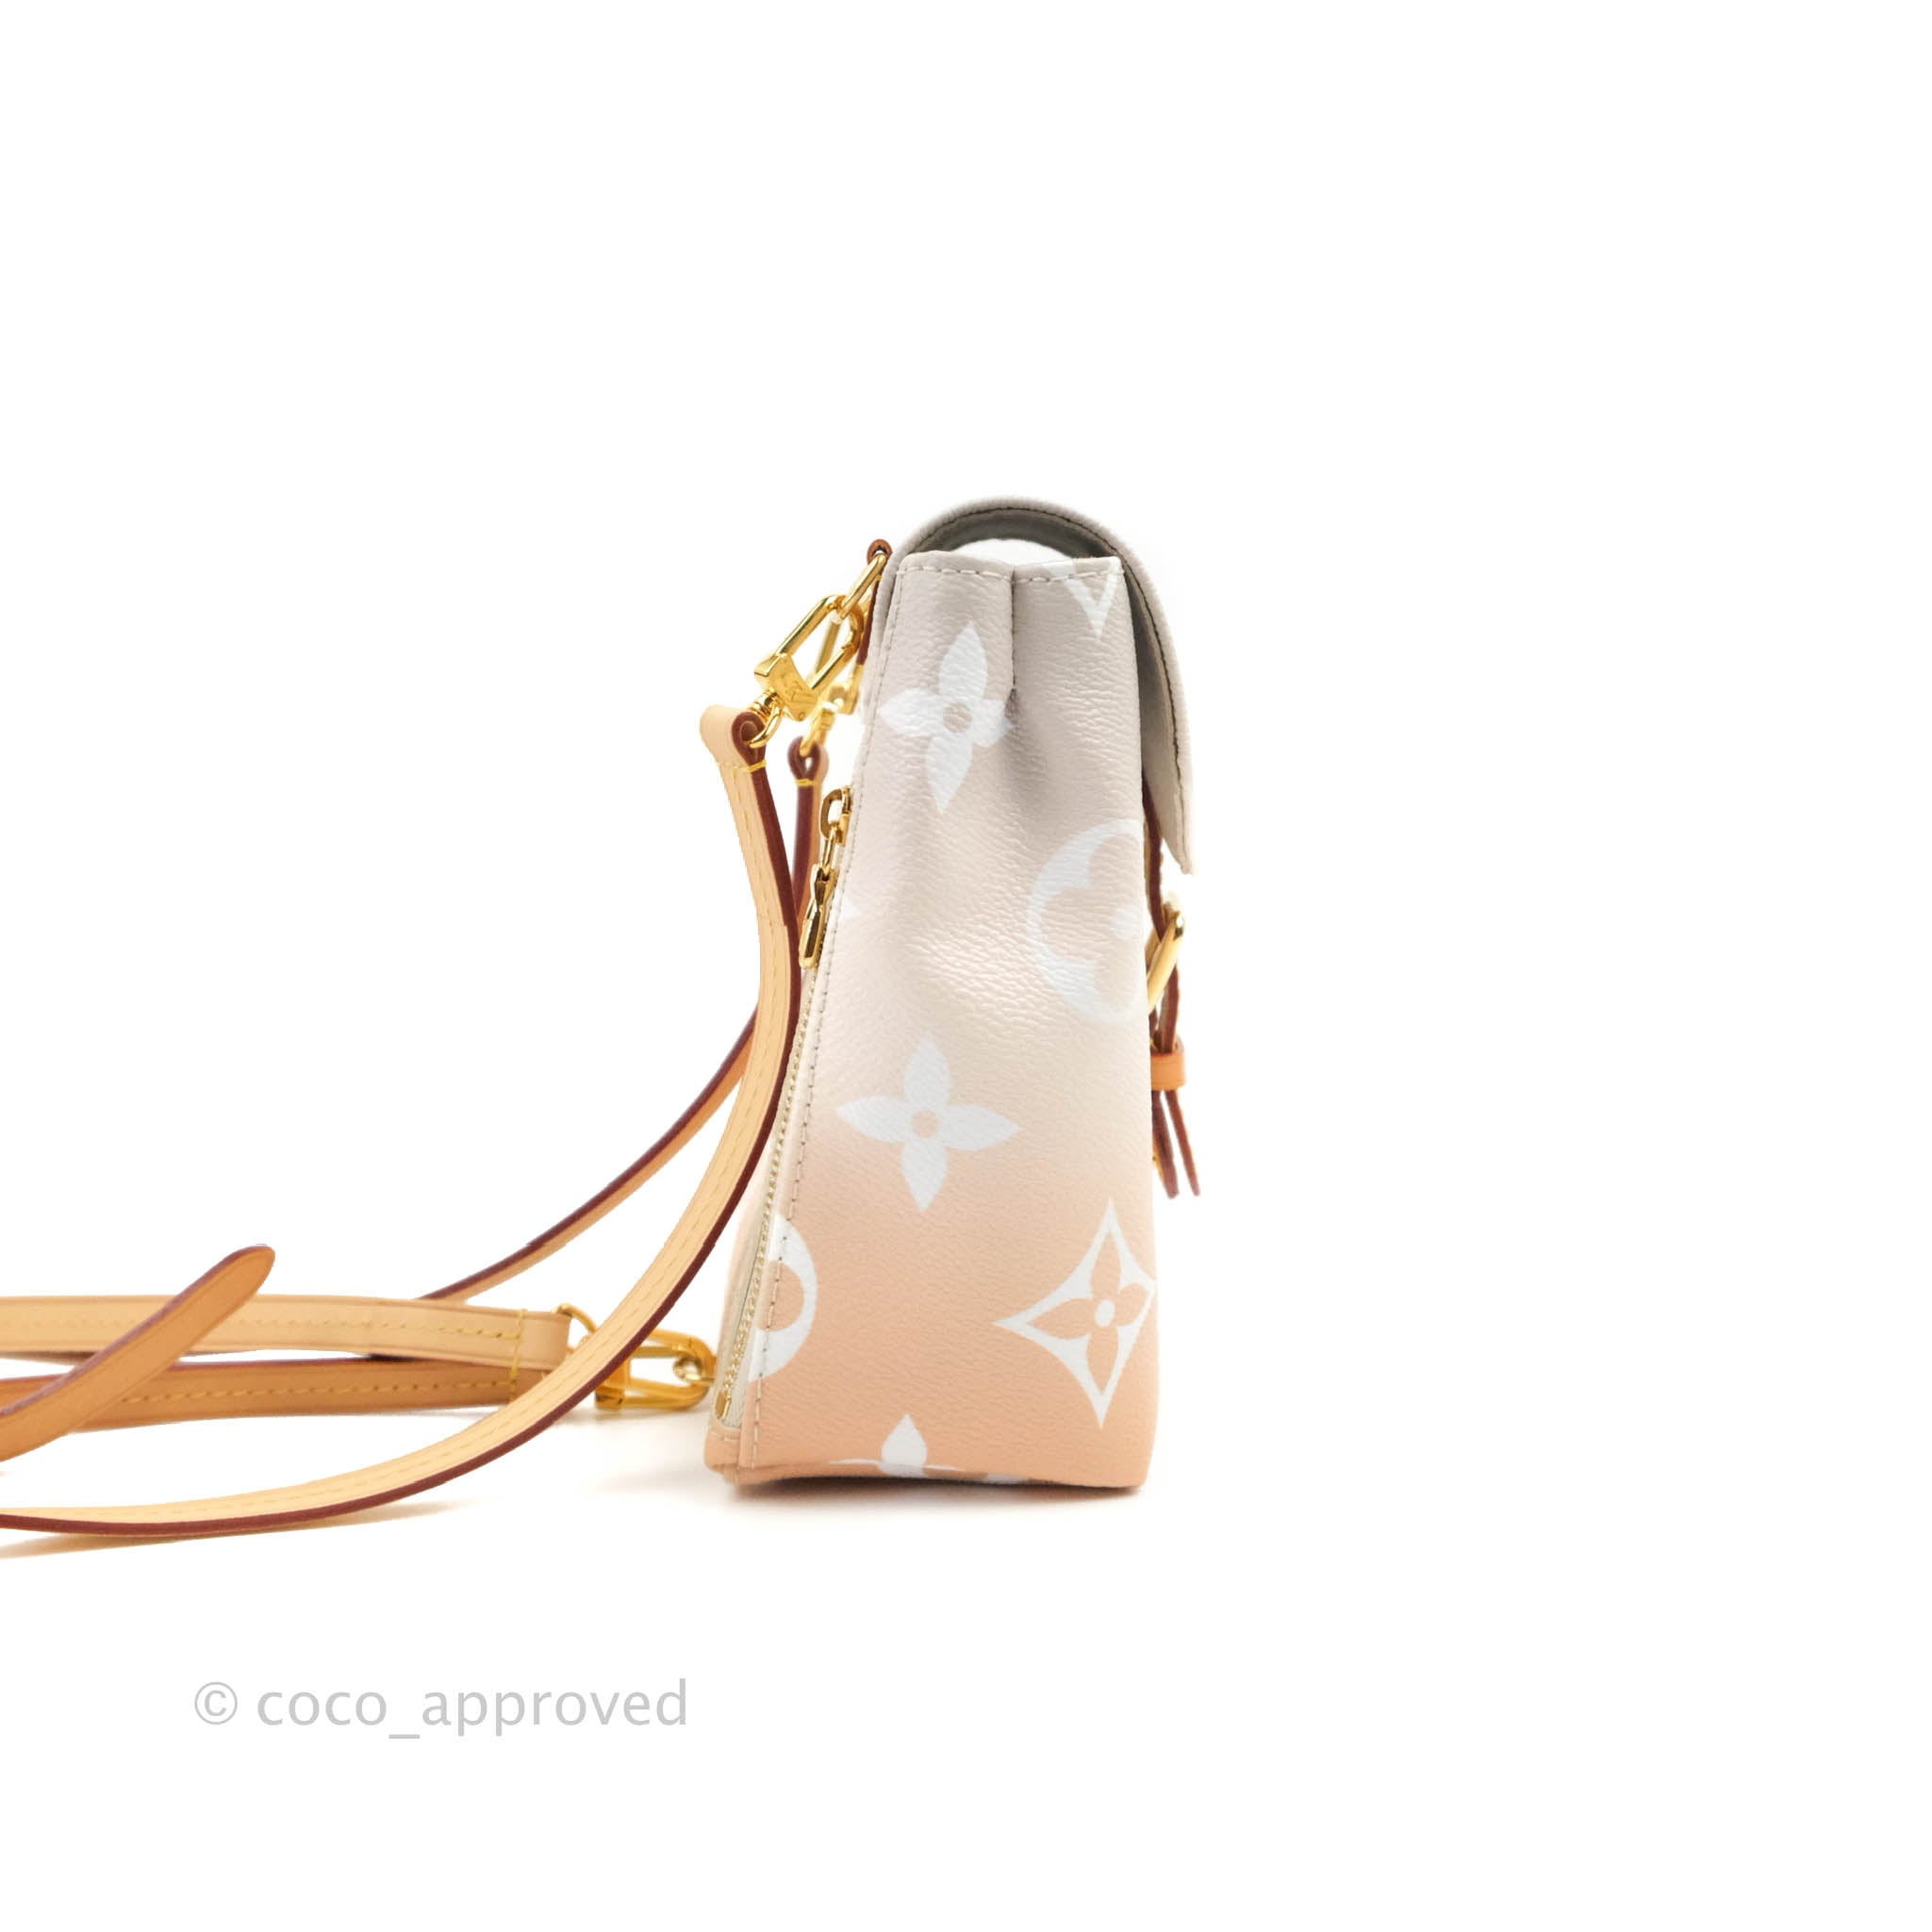 Louis Vuitton By The Pool Tiny Backpack Monogram Empreinte Mist